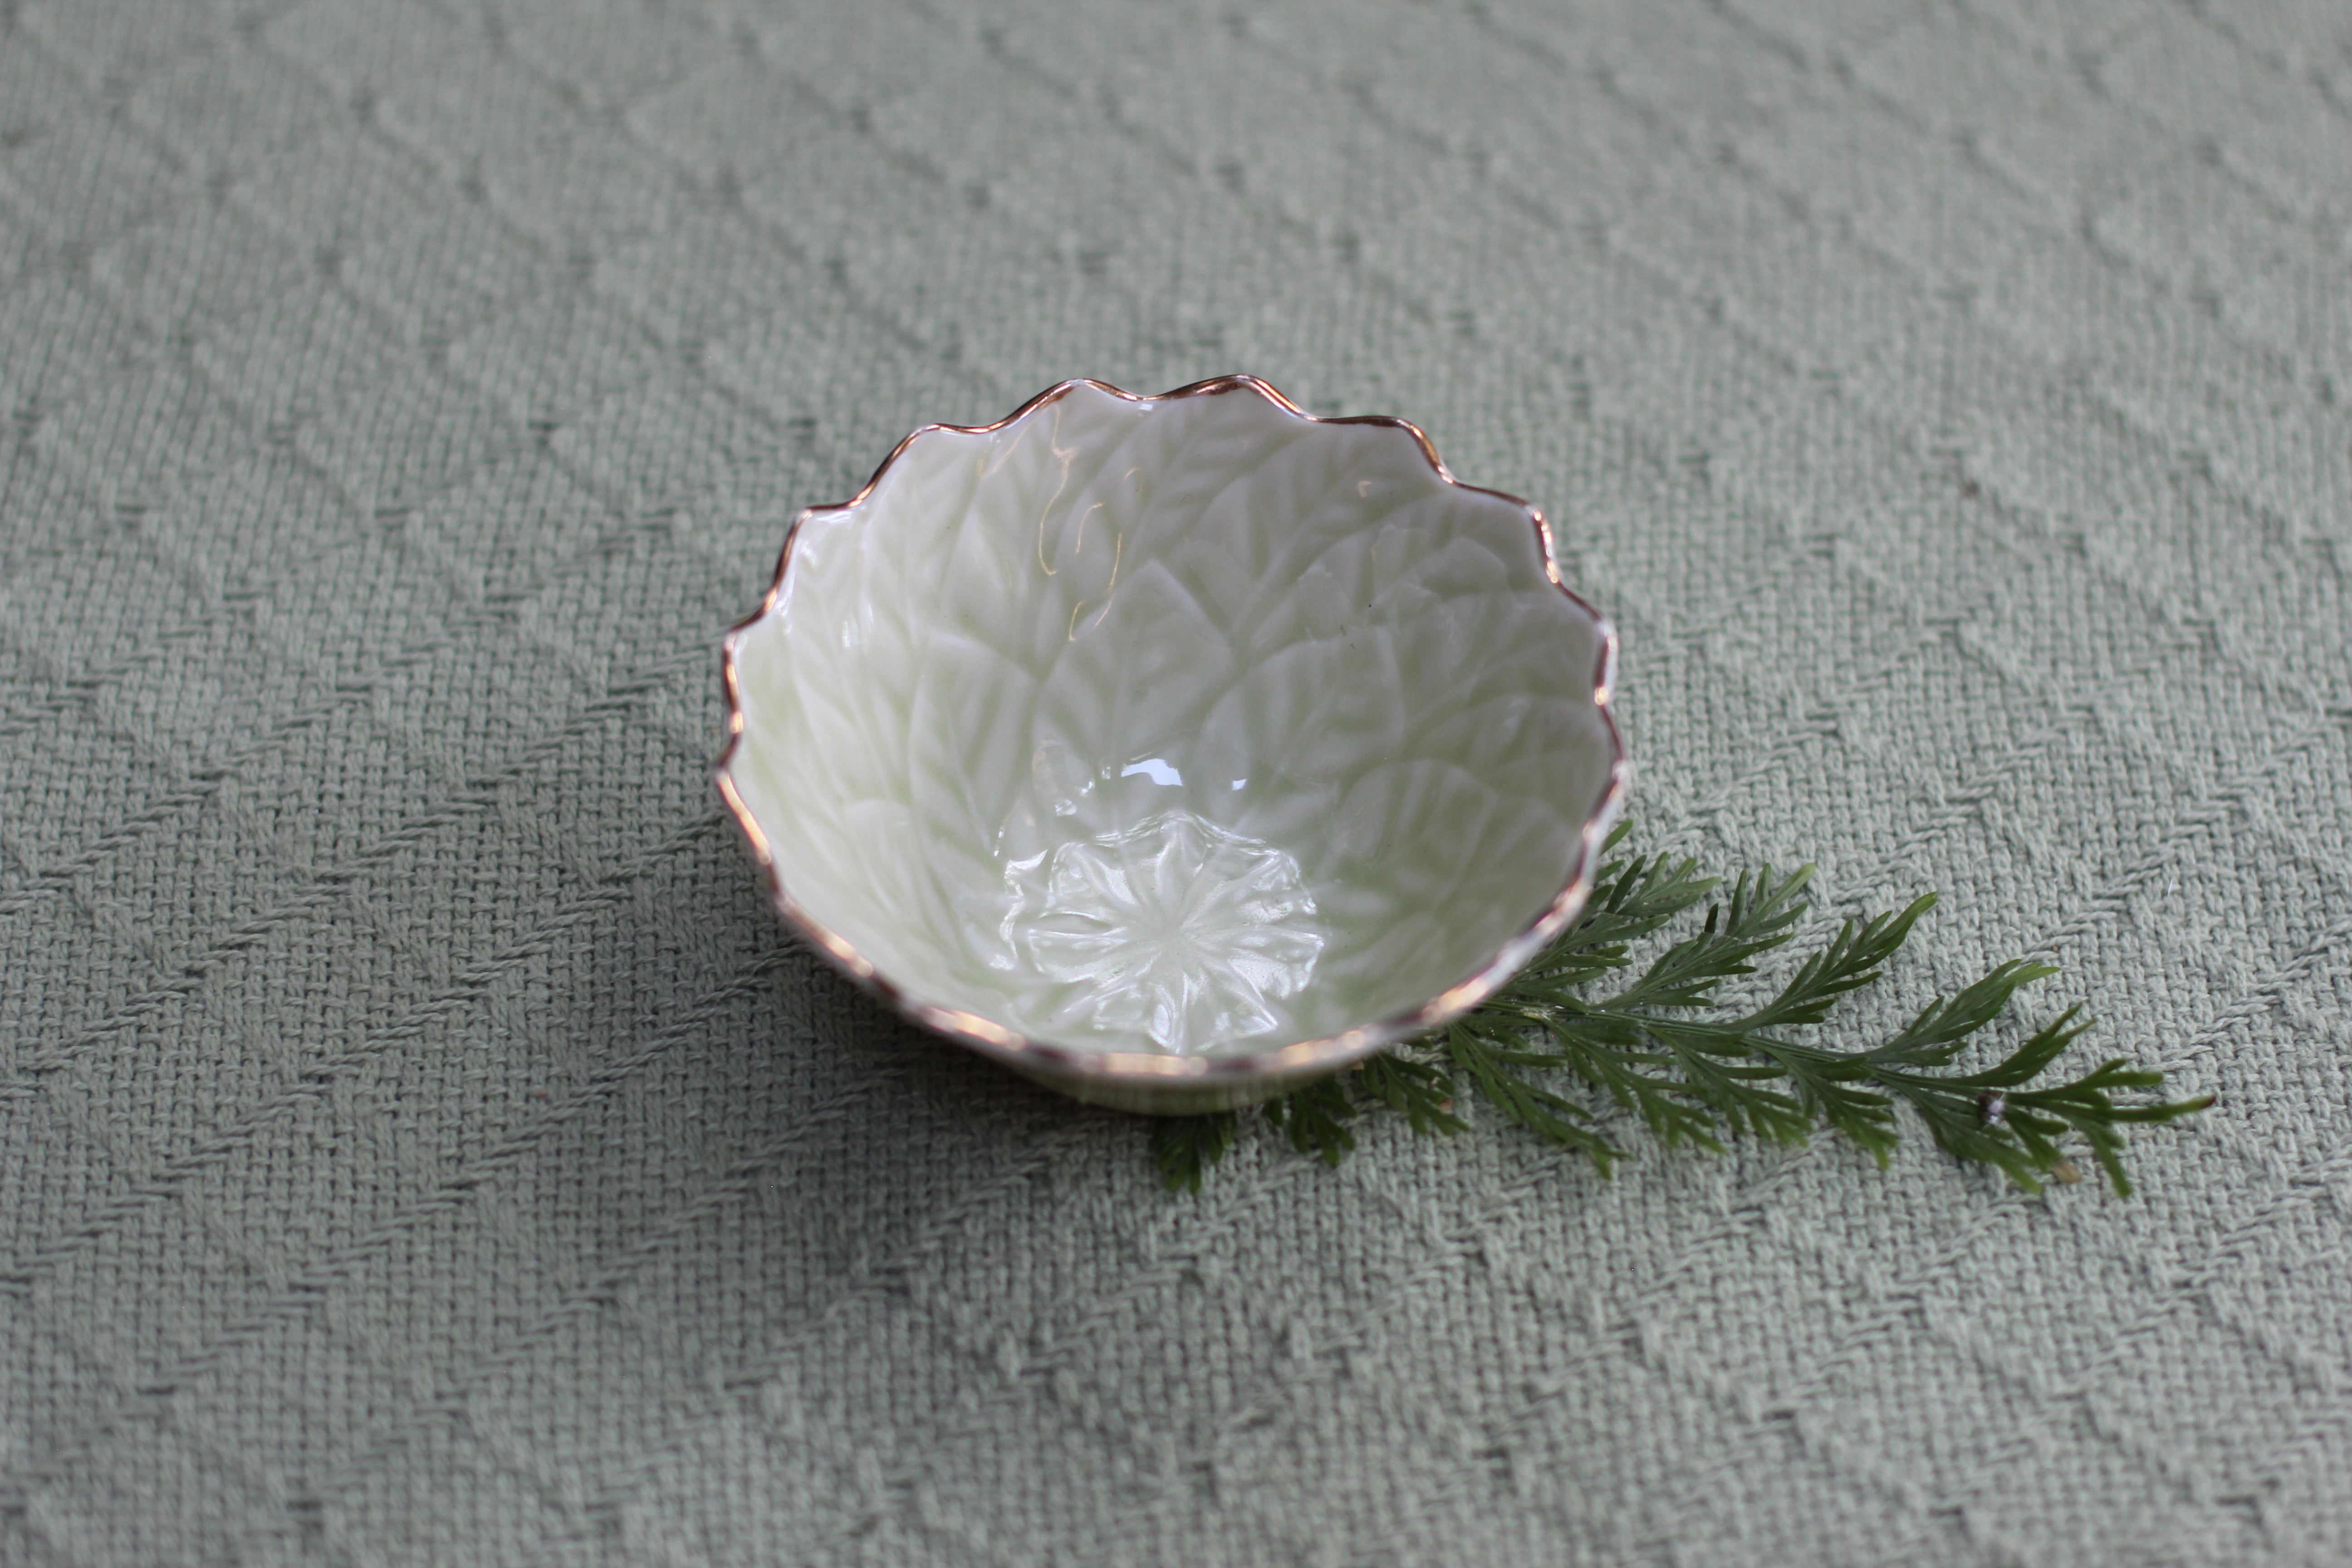 Antique Green Leaves Ring Bowl